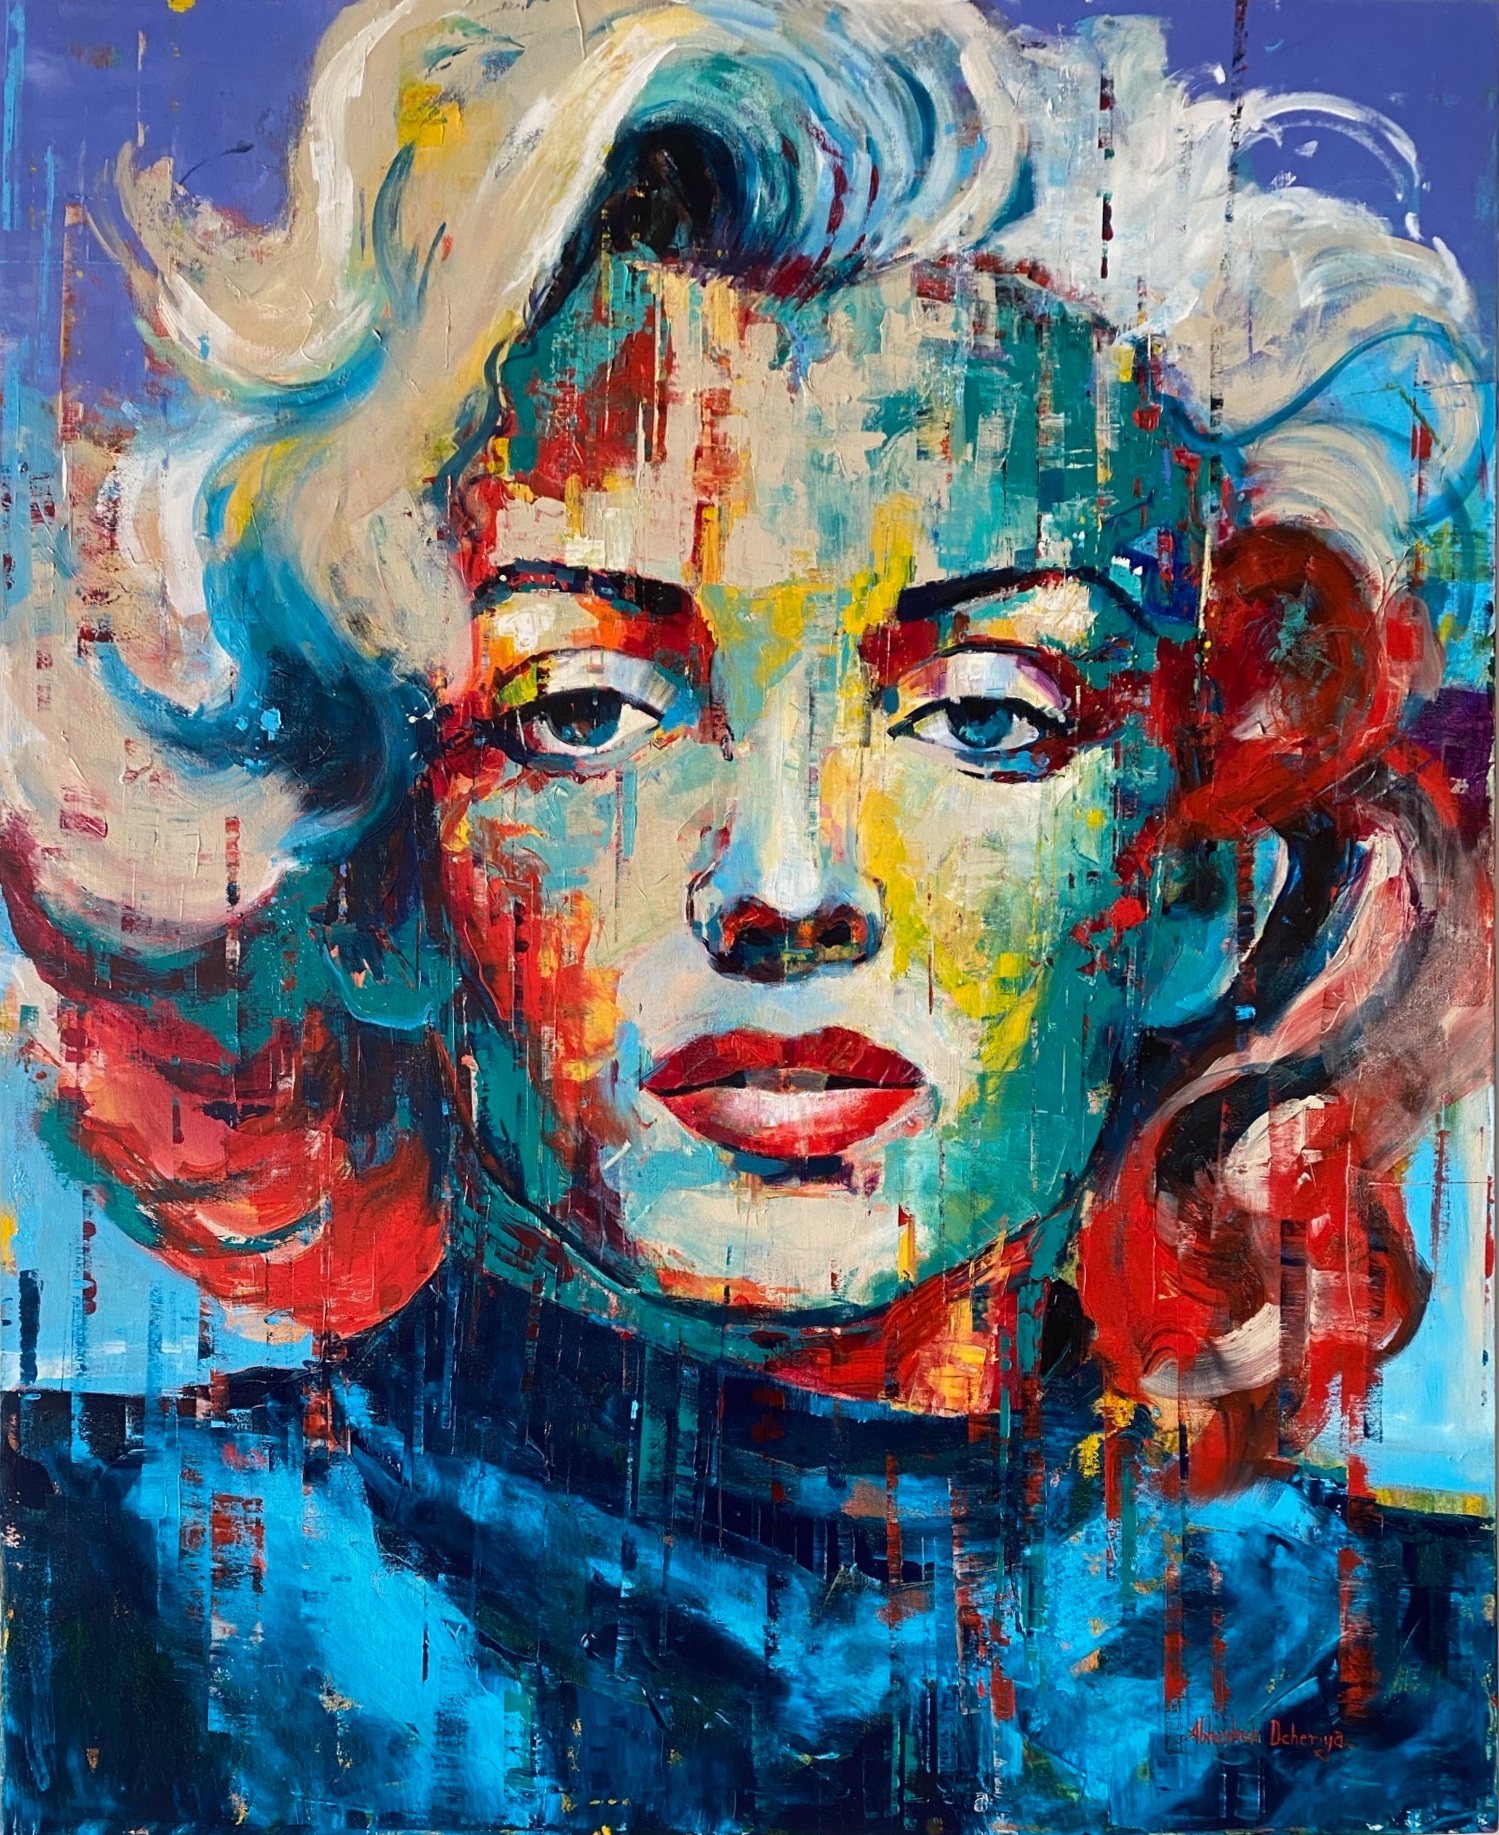 Large Marilyn painting in Blue by Abhishek Deheriya: A vibrant and captivating artwork depicting Marilyn Monroe in shades of blue. The painting showcases bold brushstrokes and intricate textures, capturing the essence of Marilyn's iconic image in a contemporary and expressive style